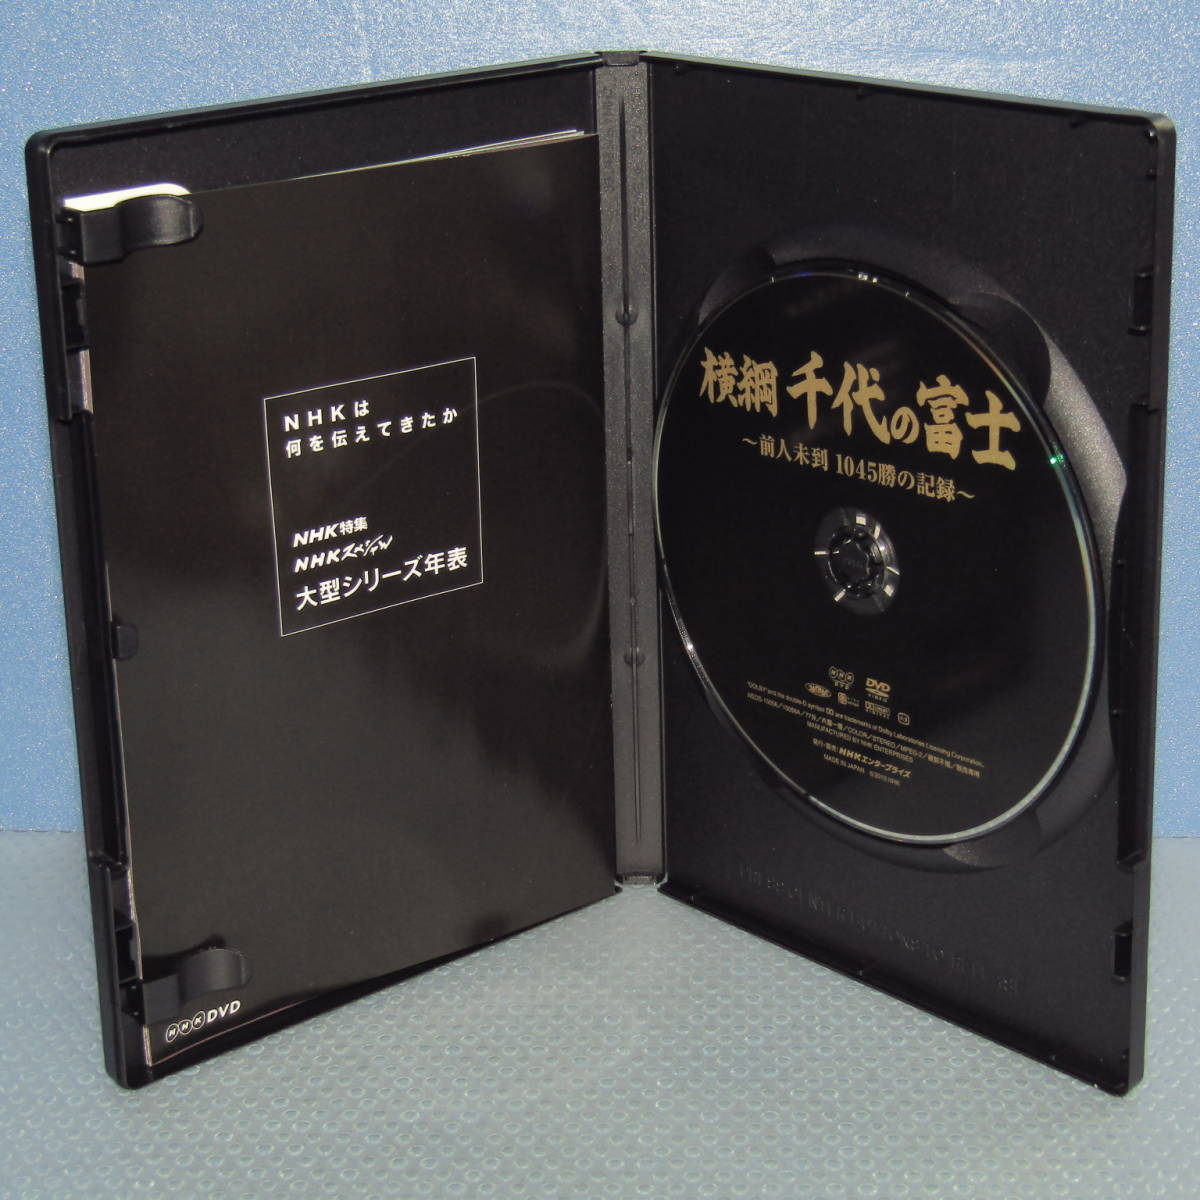 DVD[NHK special width . thousand fee. Fuji front person not yet .1045.. record ]